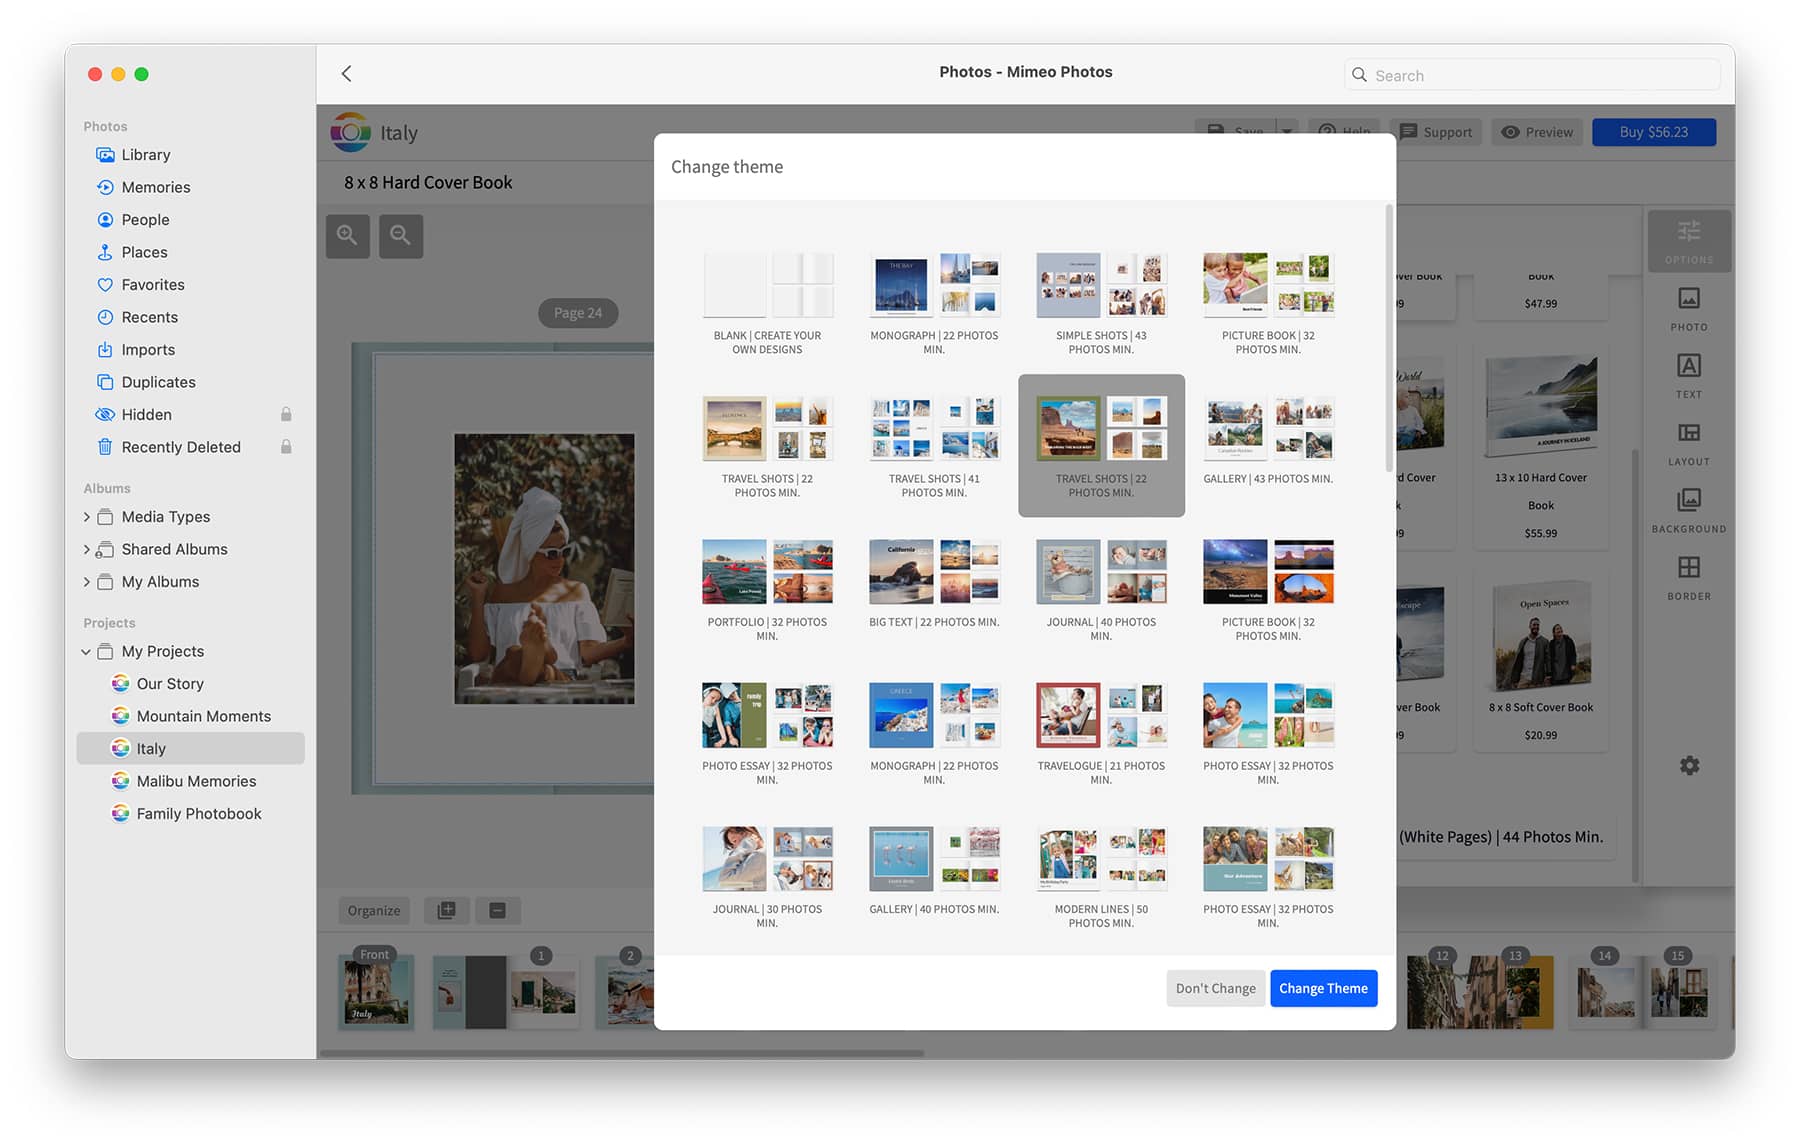 Mimeo Photos features advanced design controls in the macOS app